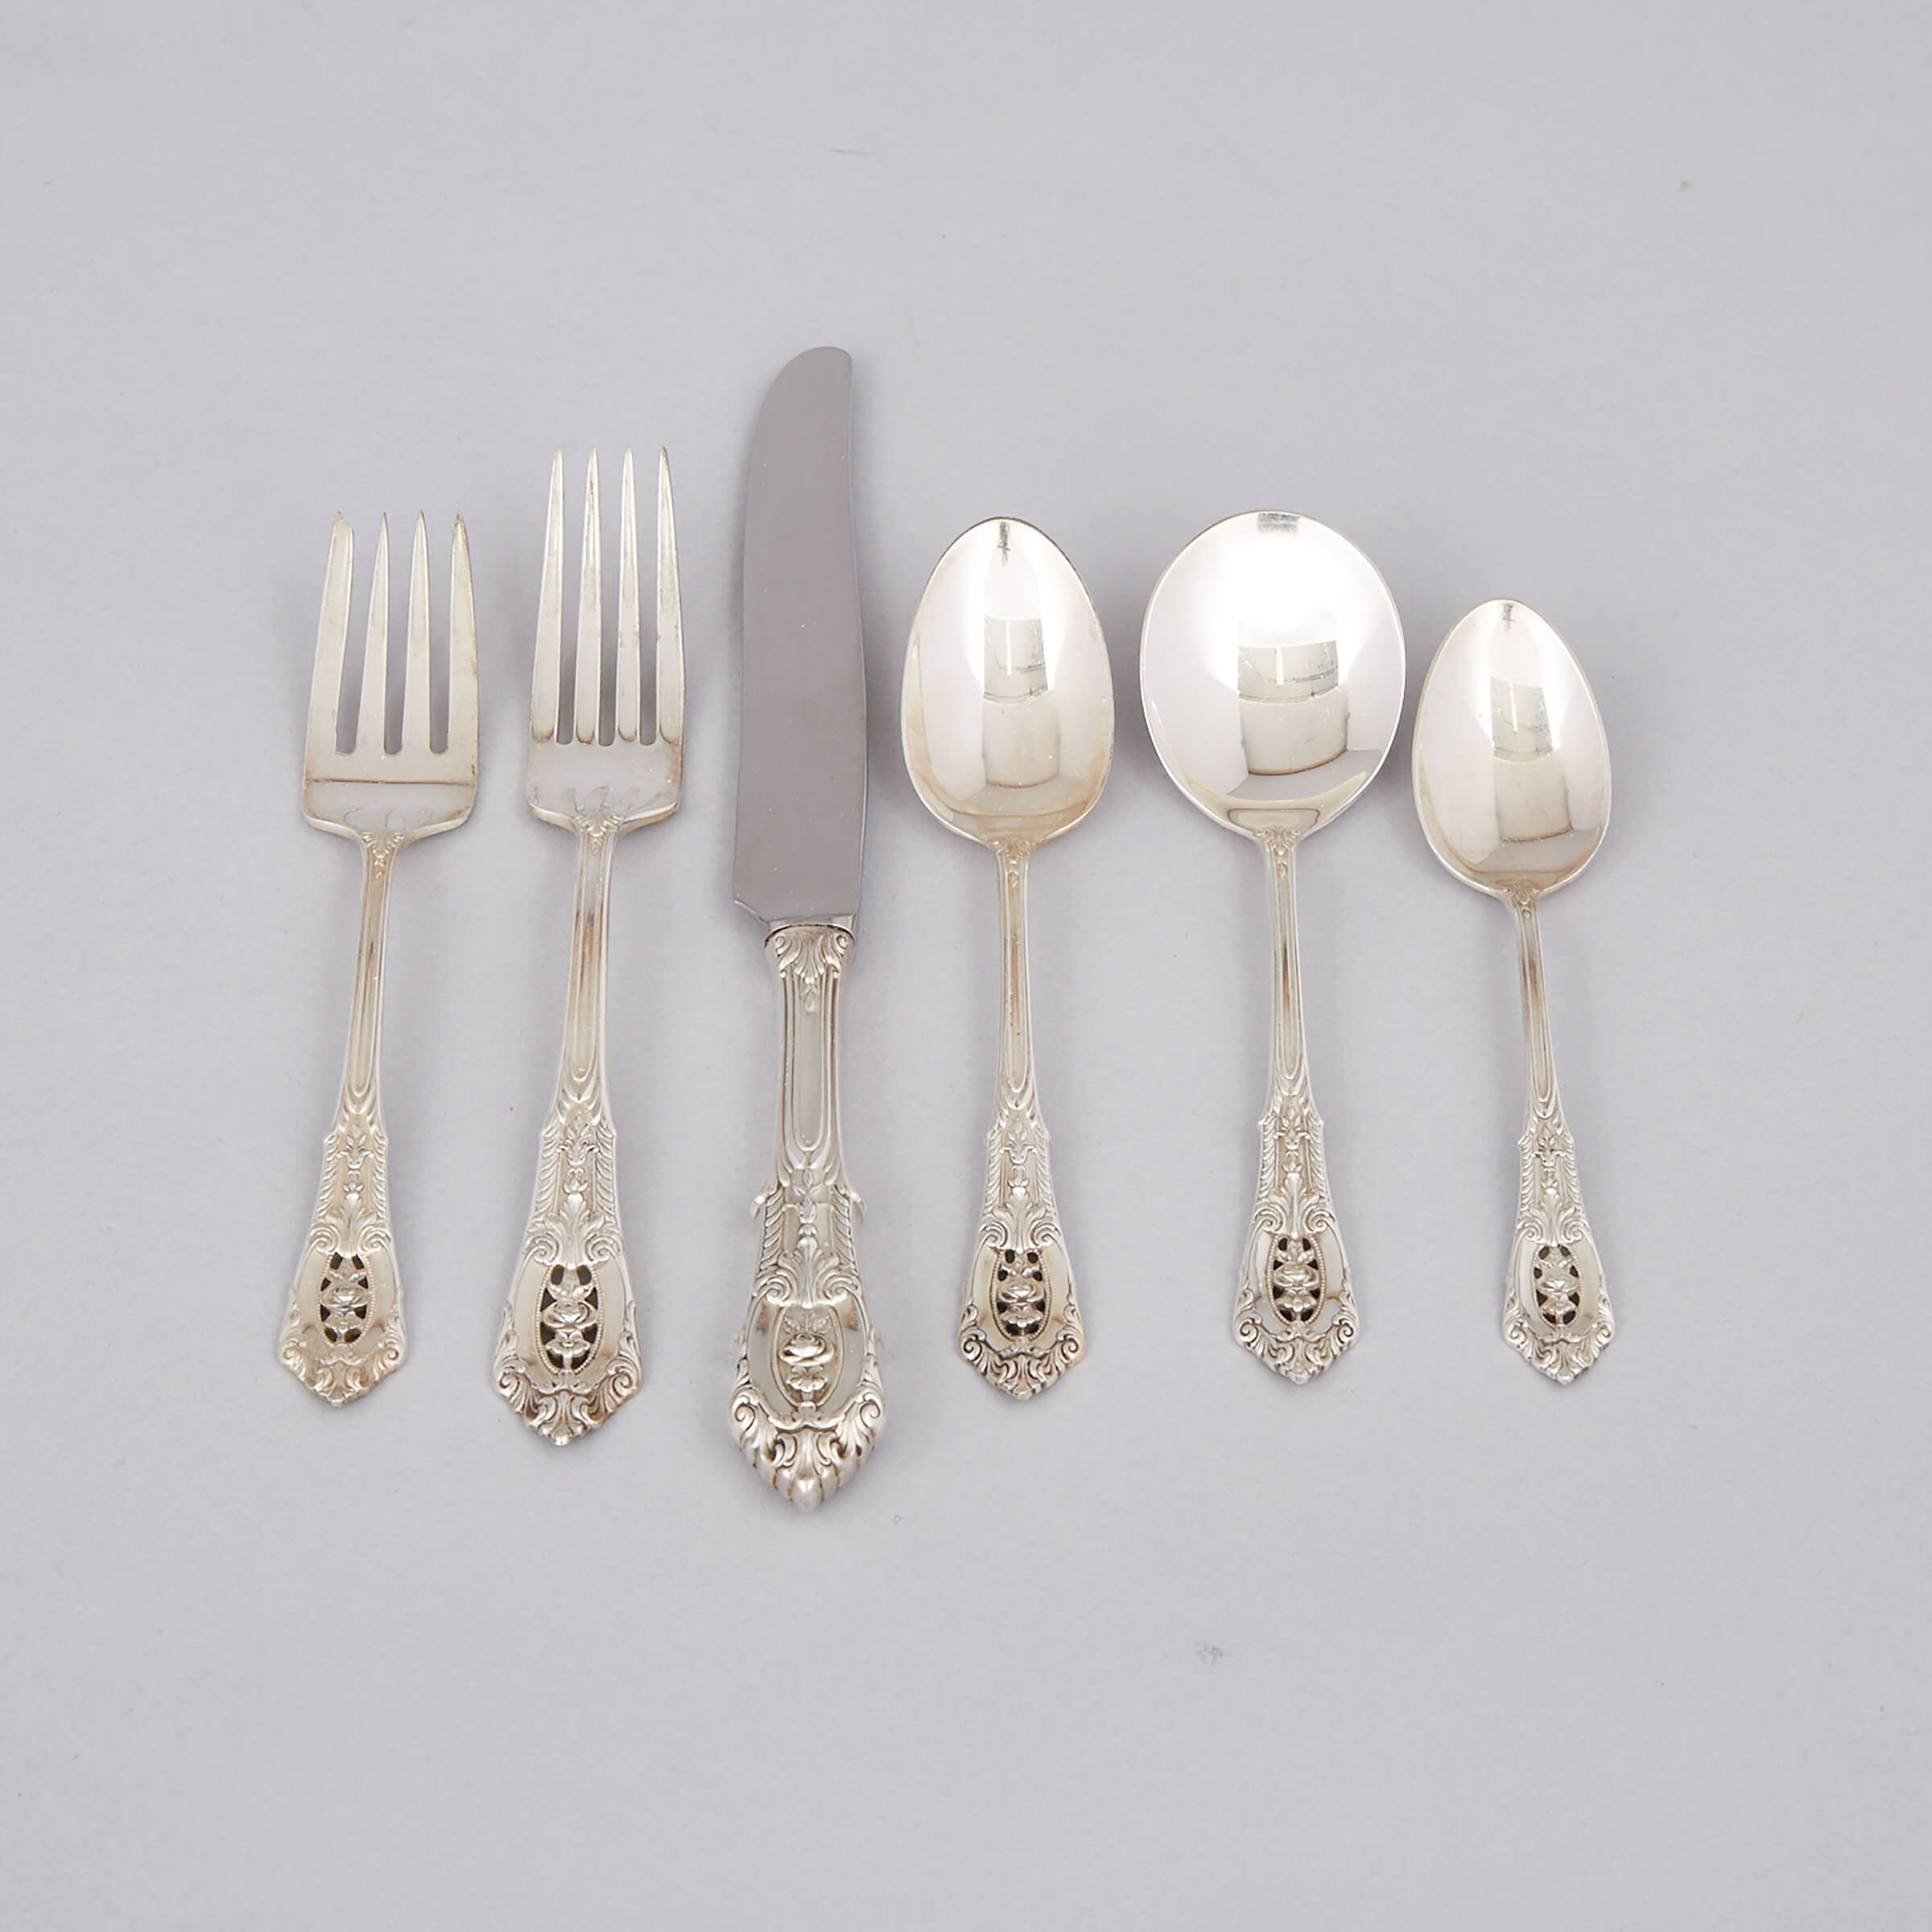 American Silver ‘Rosepoint’ Pattern Flatware Service, Wallace Silversmiths,  Wallingford, Ct., 20th century